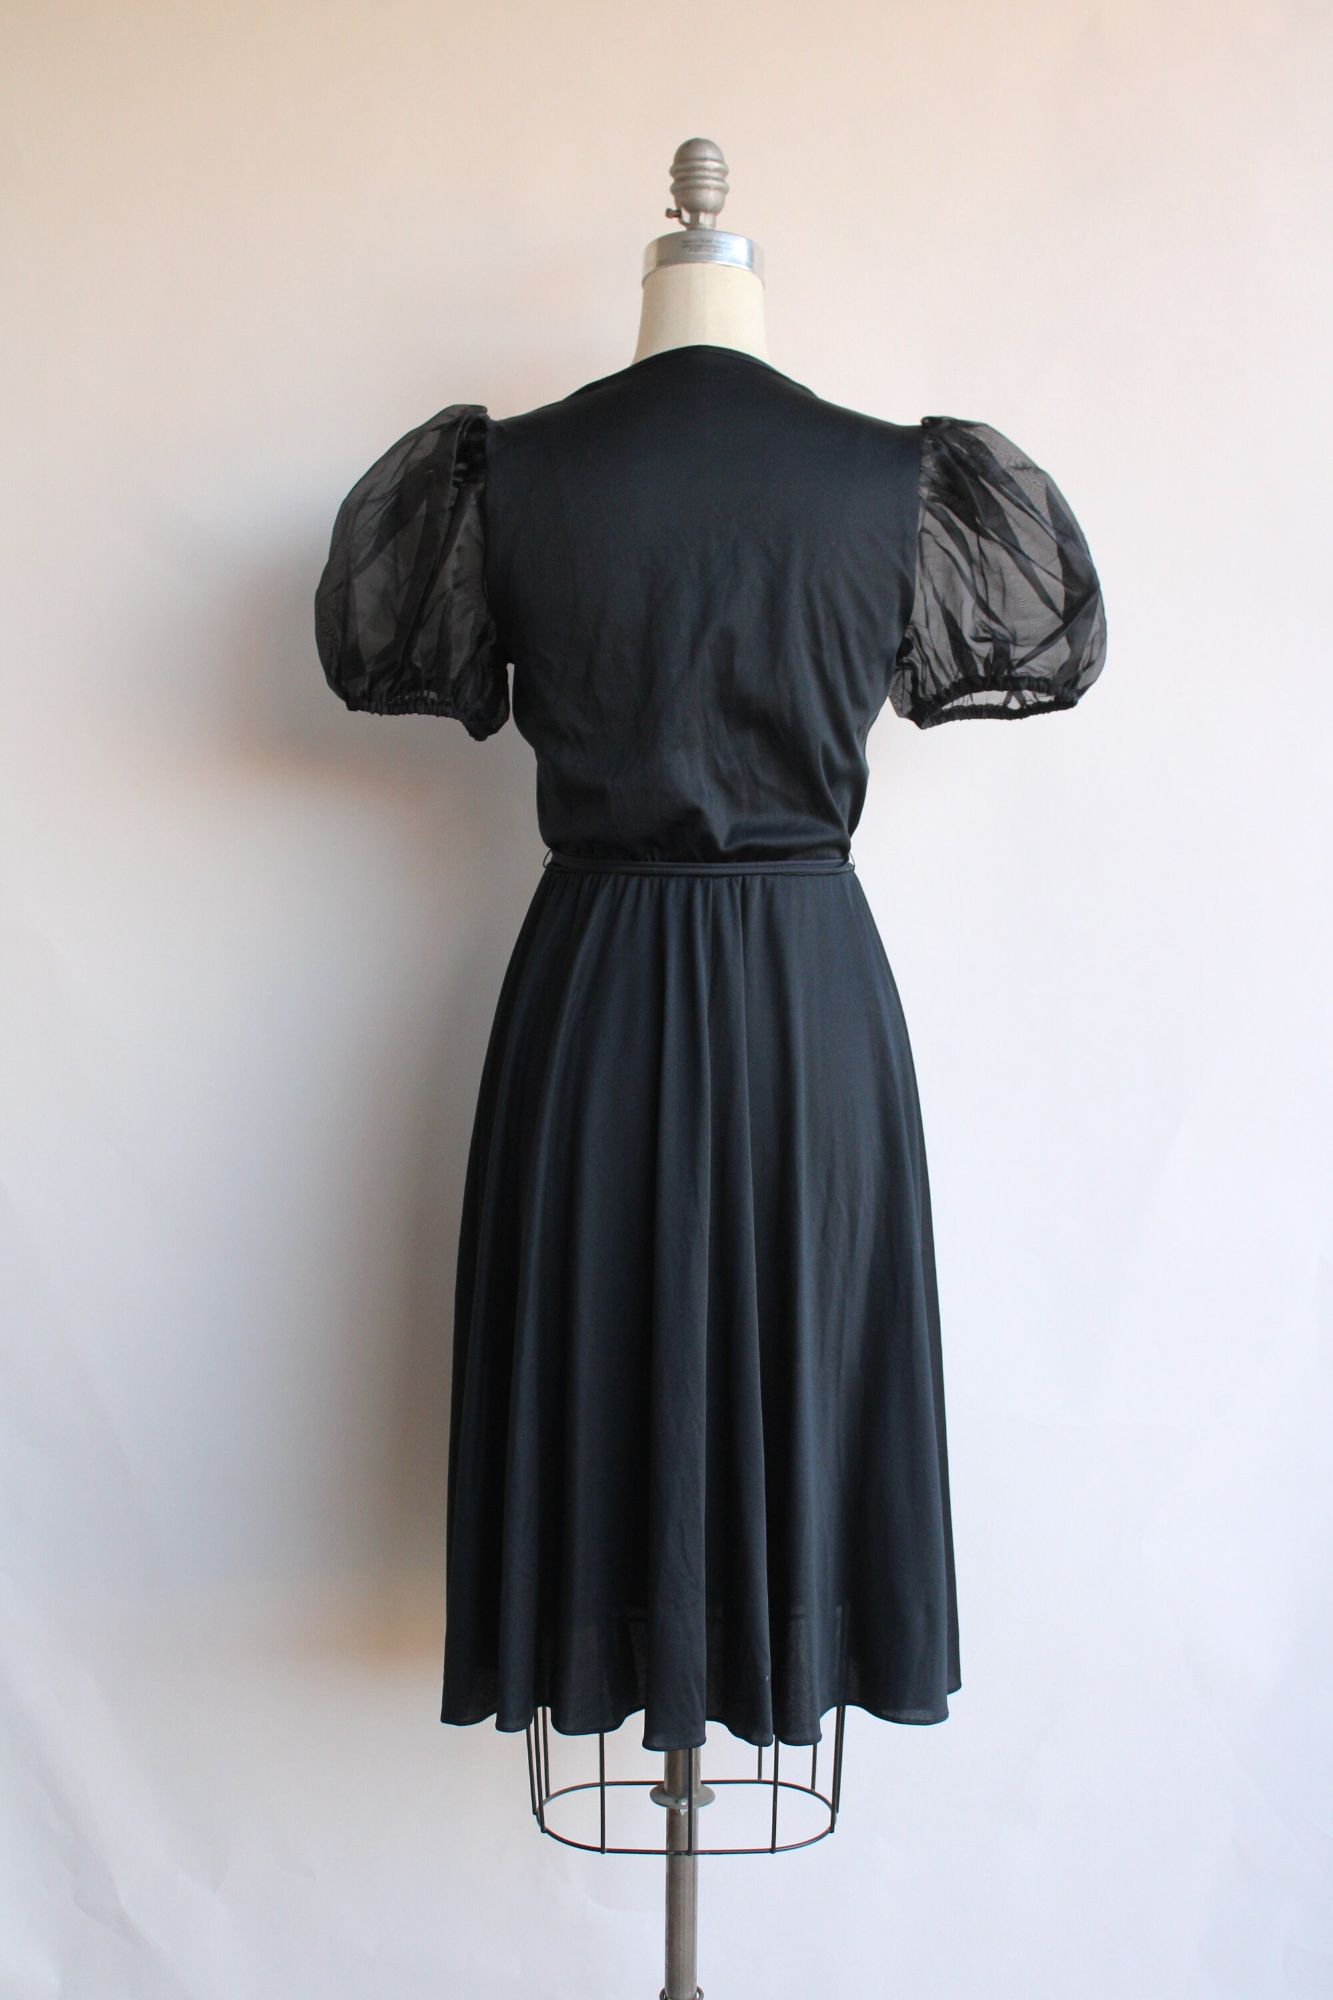 Vintage 1960s Black Nylon Nightgown with Bow and Tie Belt